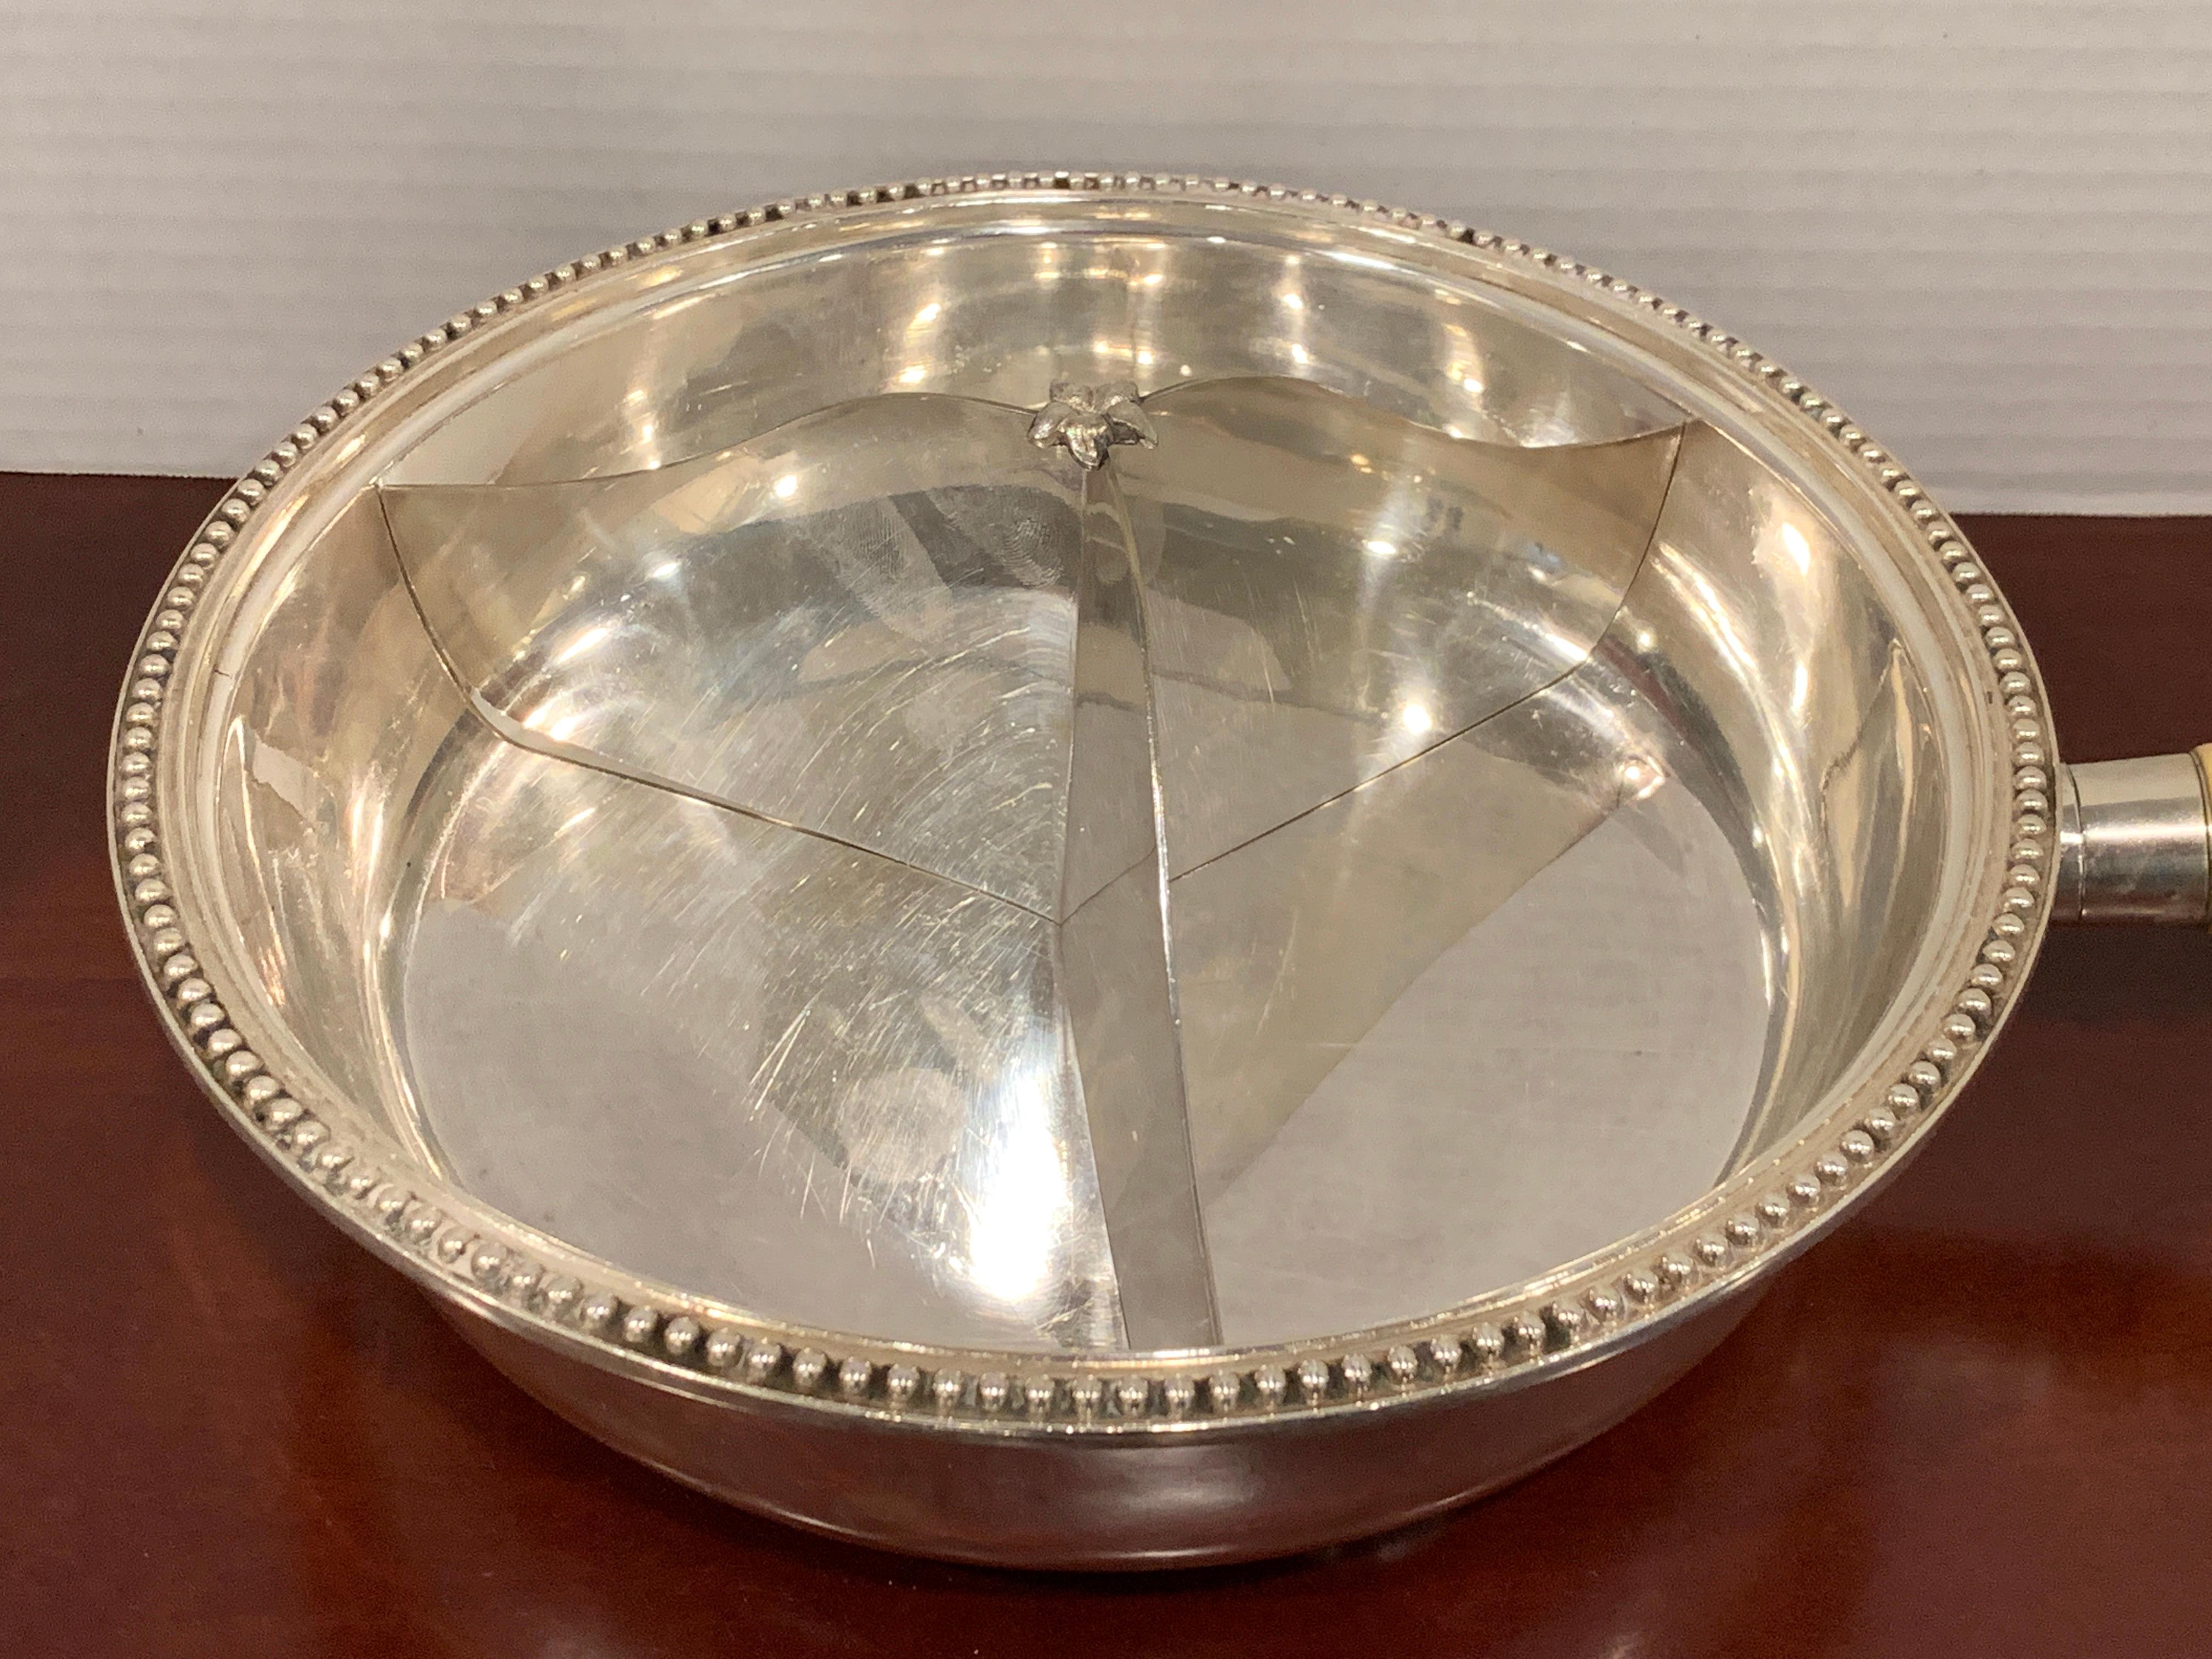 Antique English Silver Plated Warming Supper Dish by Henry Wilkinson & Co. For Sale 2